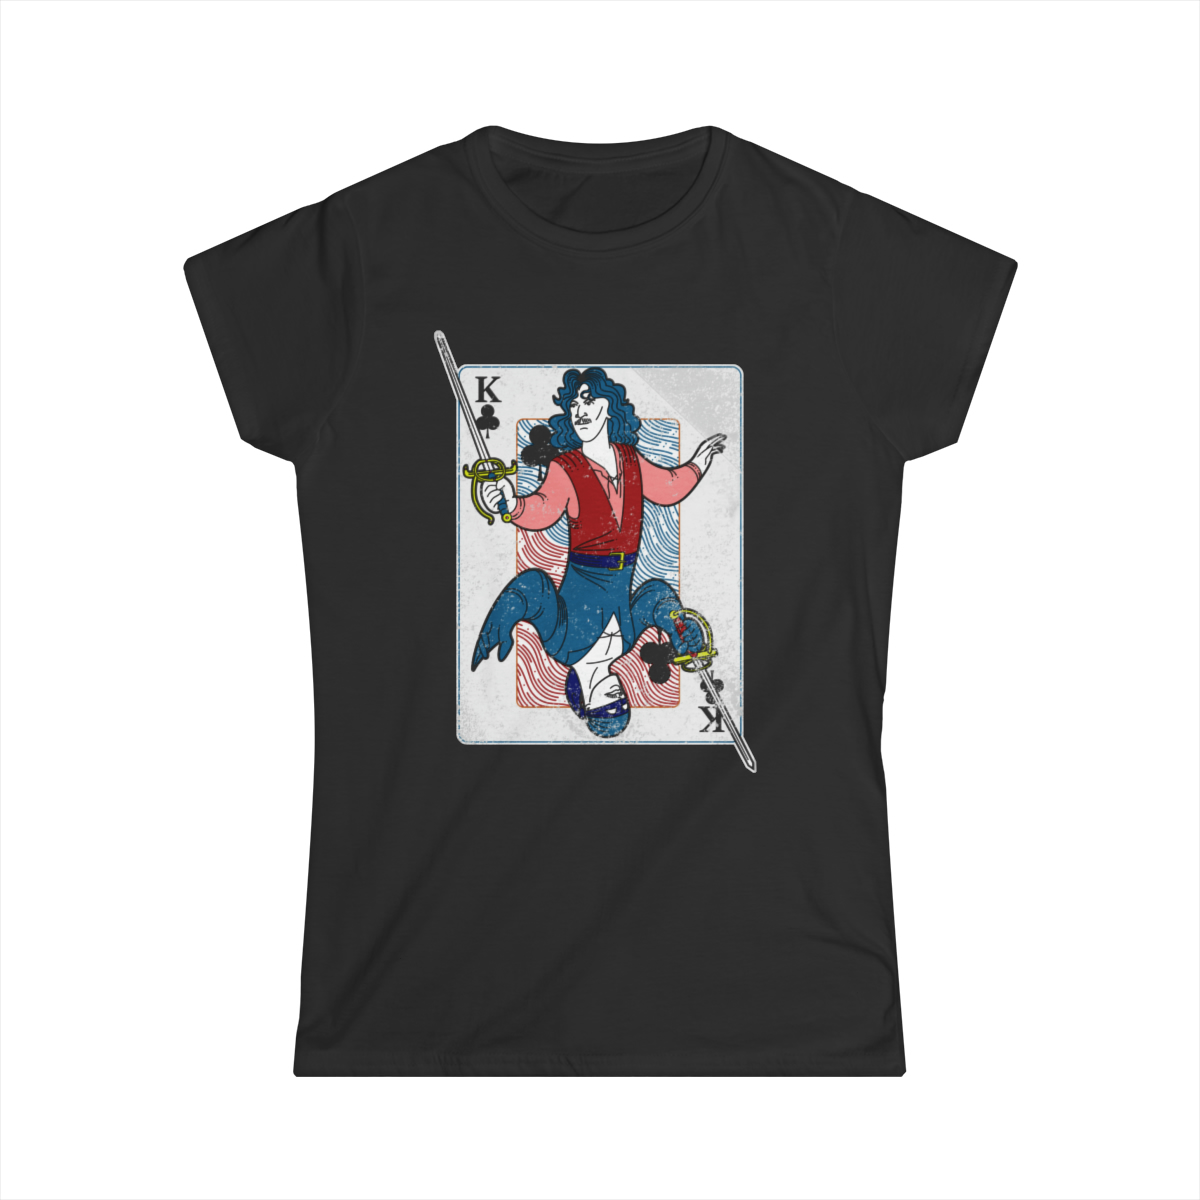 King of Clubs - Women's Softstyle Tee